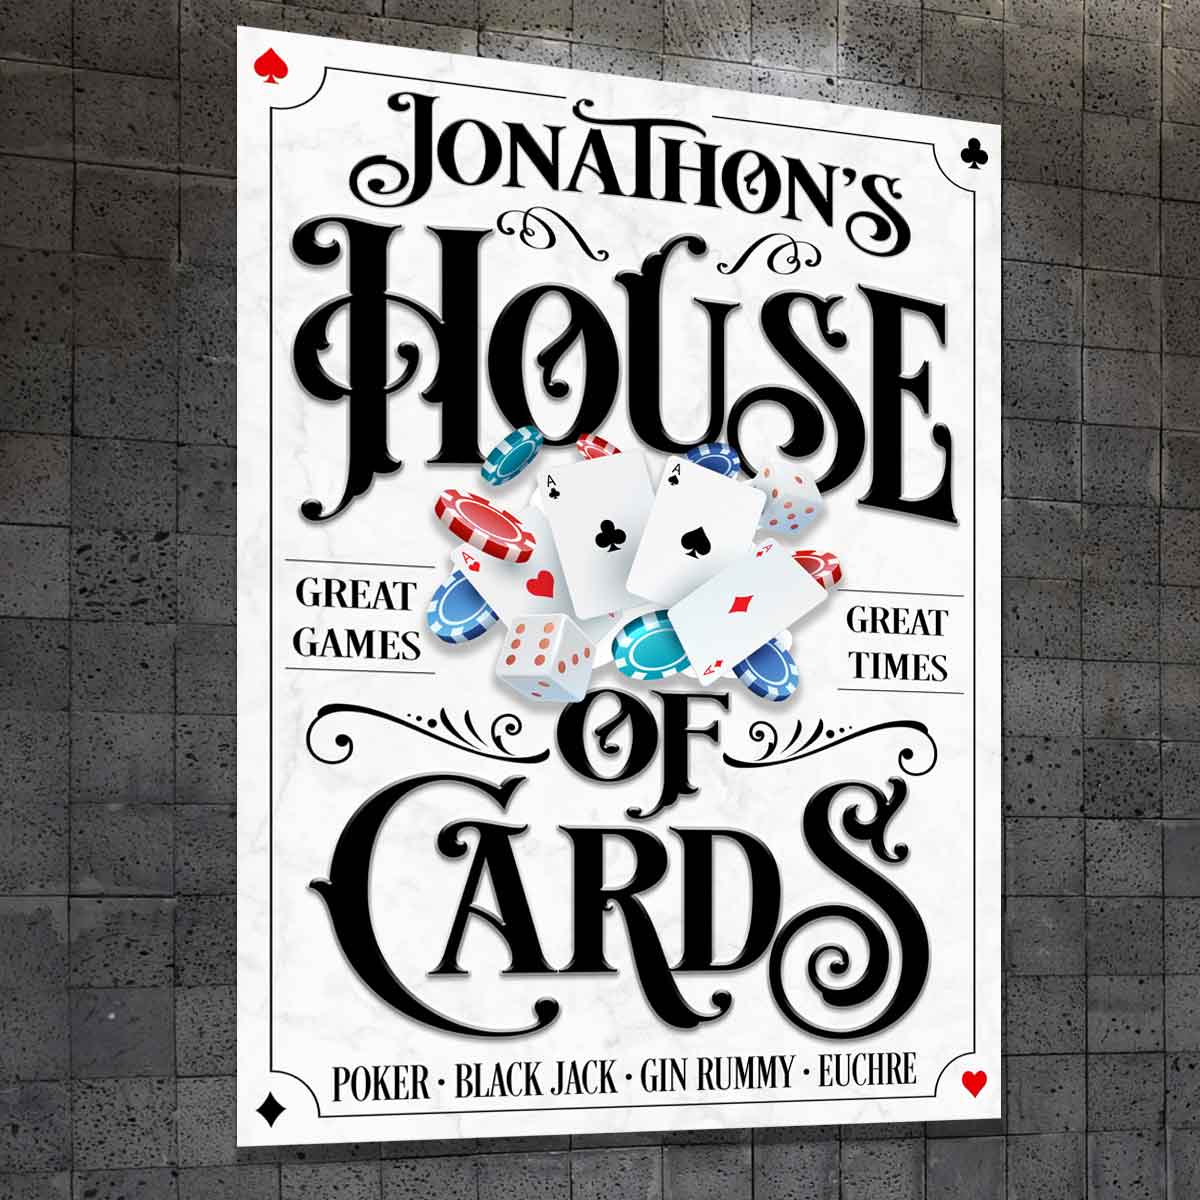 Poker Room Signs and Decor on white textured background with black letters that say House of Cards, great games, great times, Poker, black jack, gin rummy, euchre